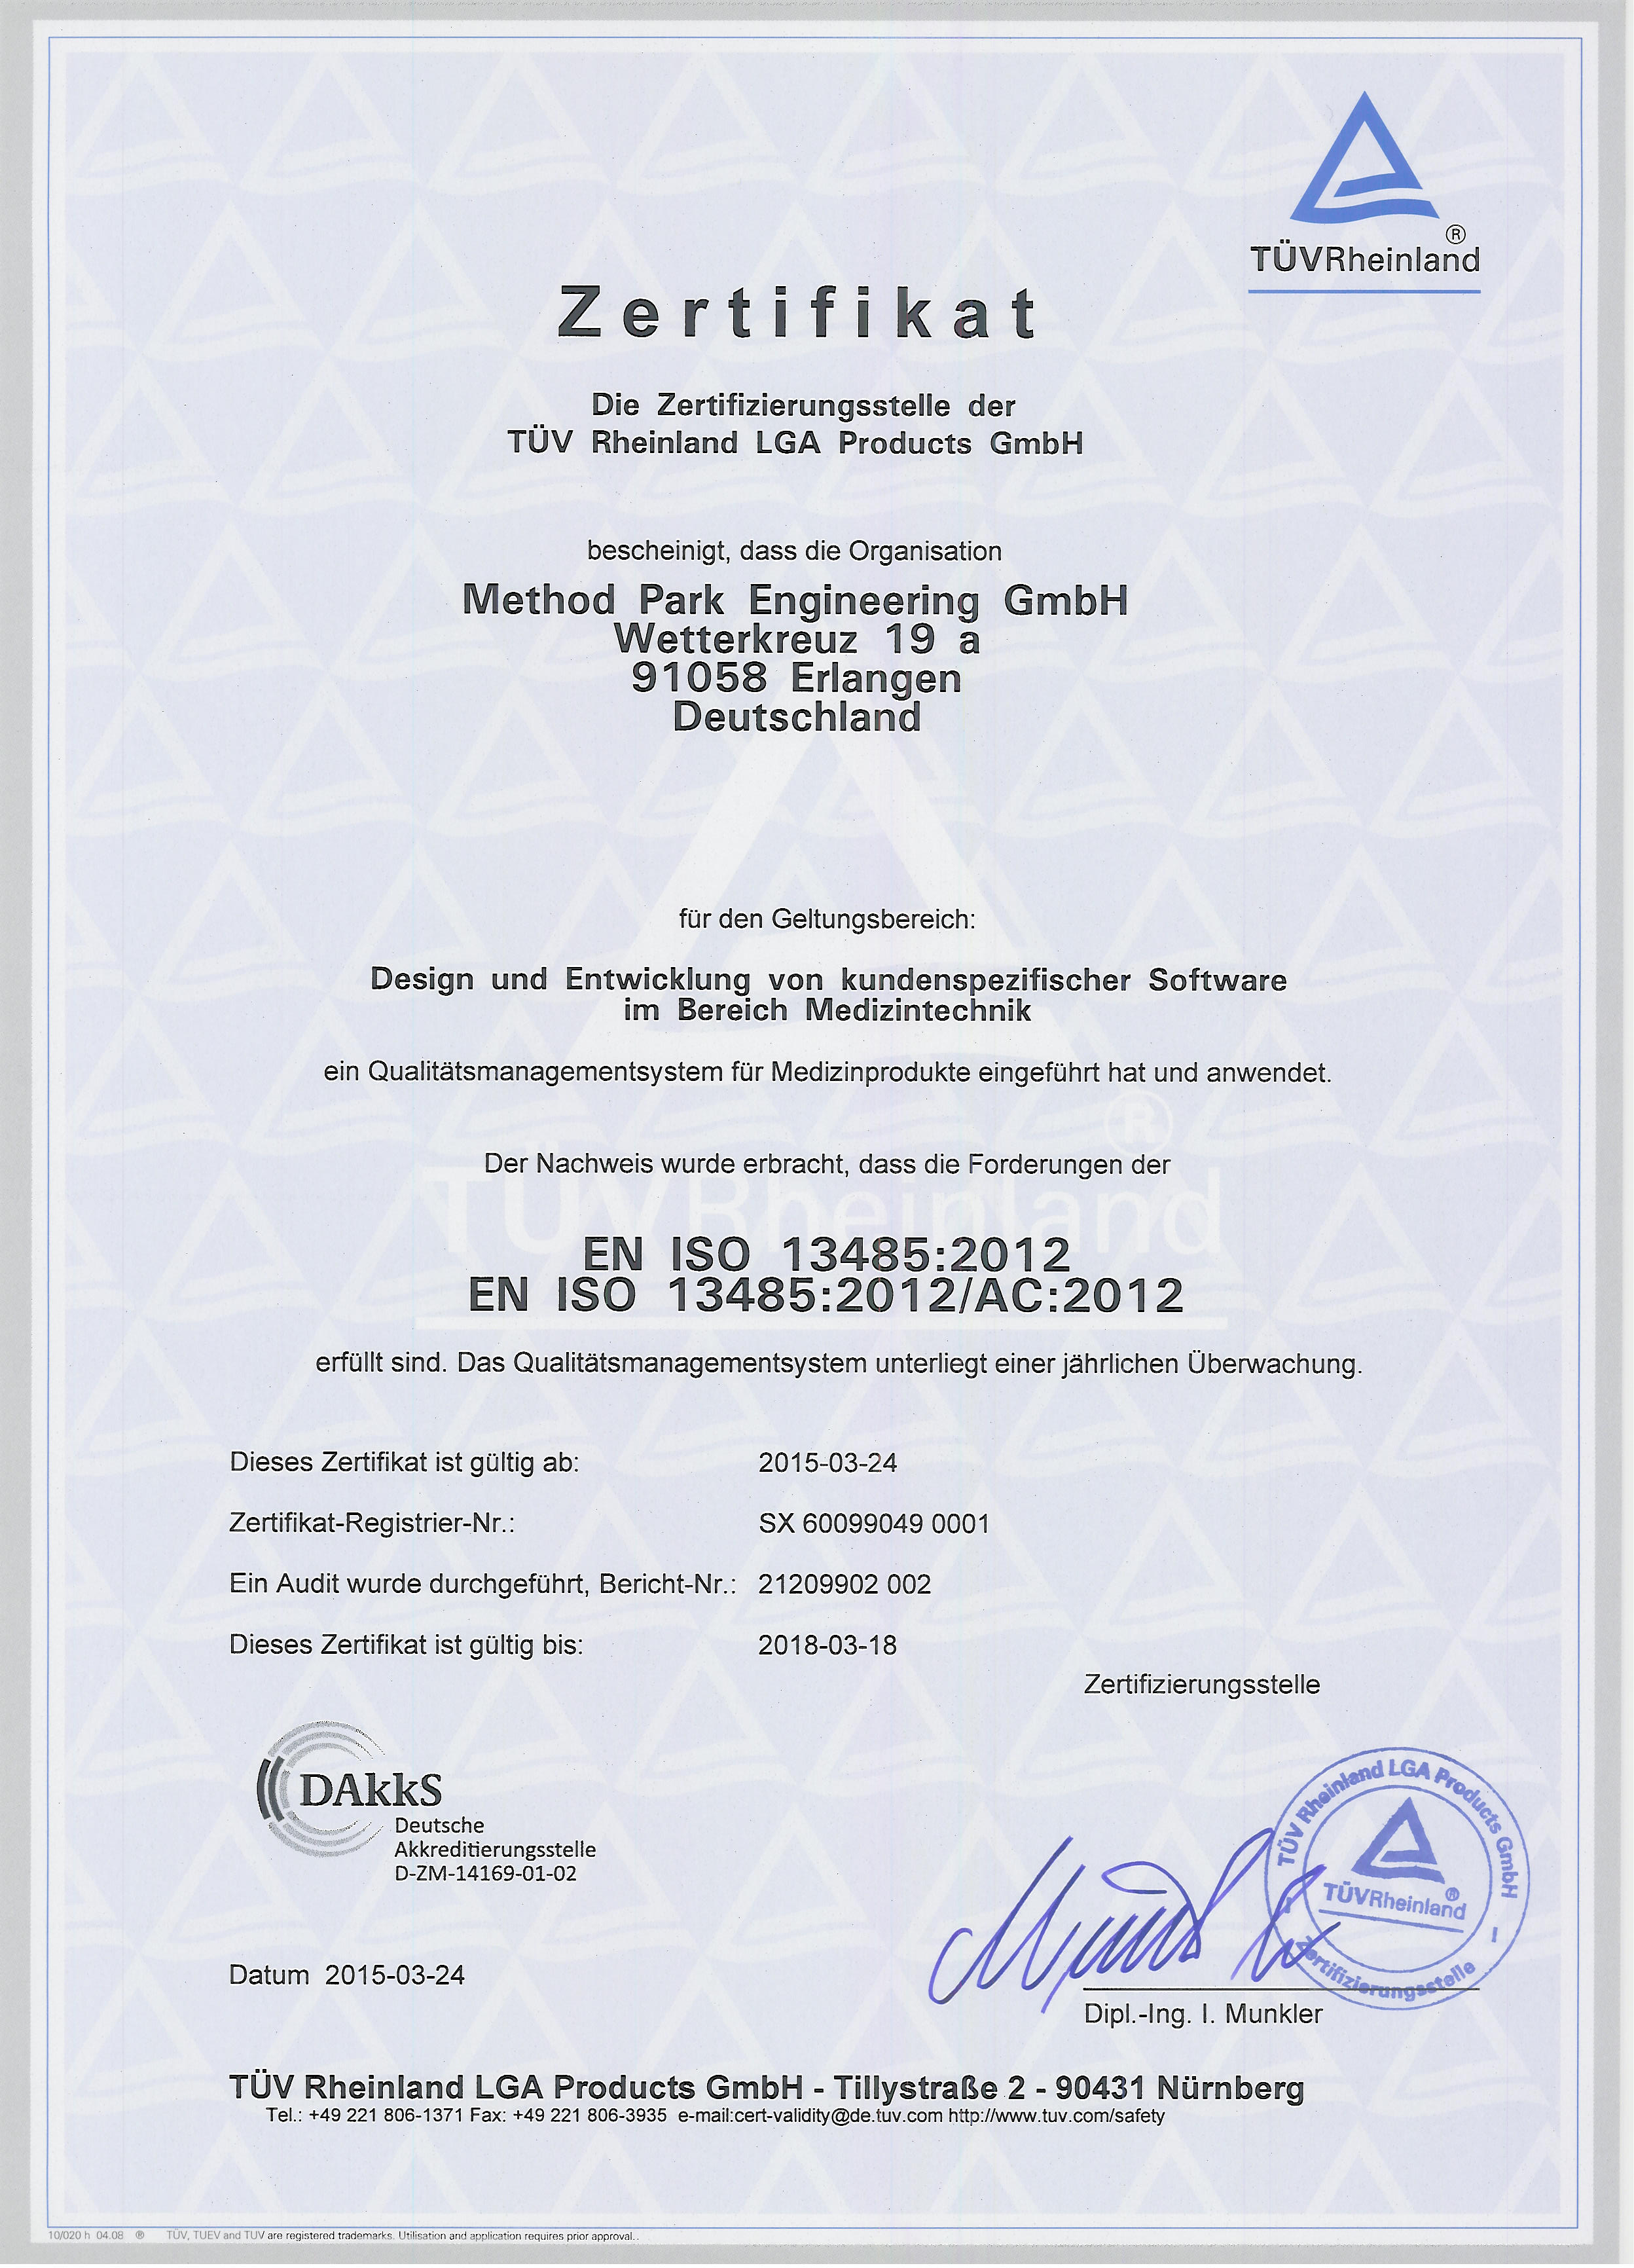 Method Park successfully certified according to the medical standard DIN EN ISO 13485